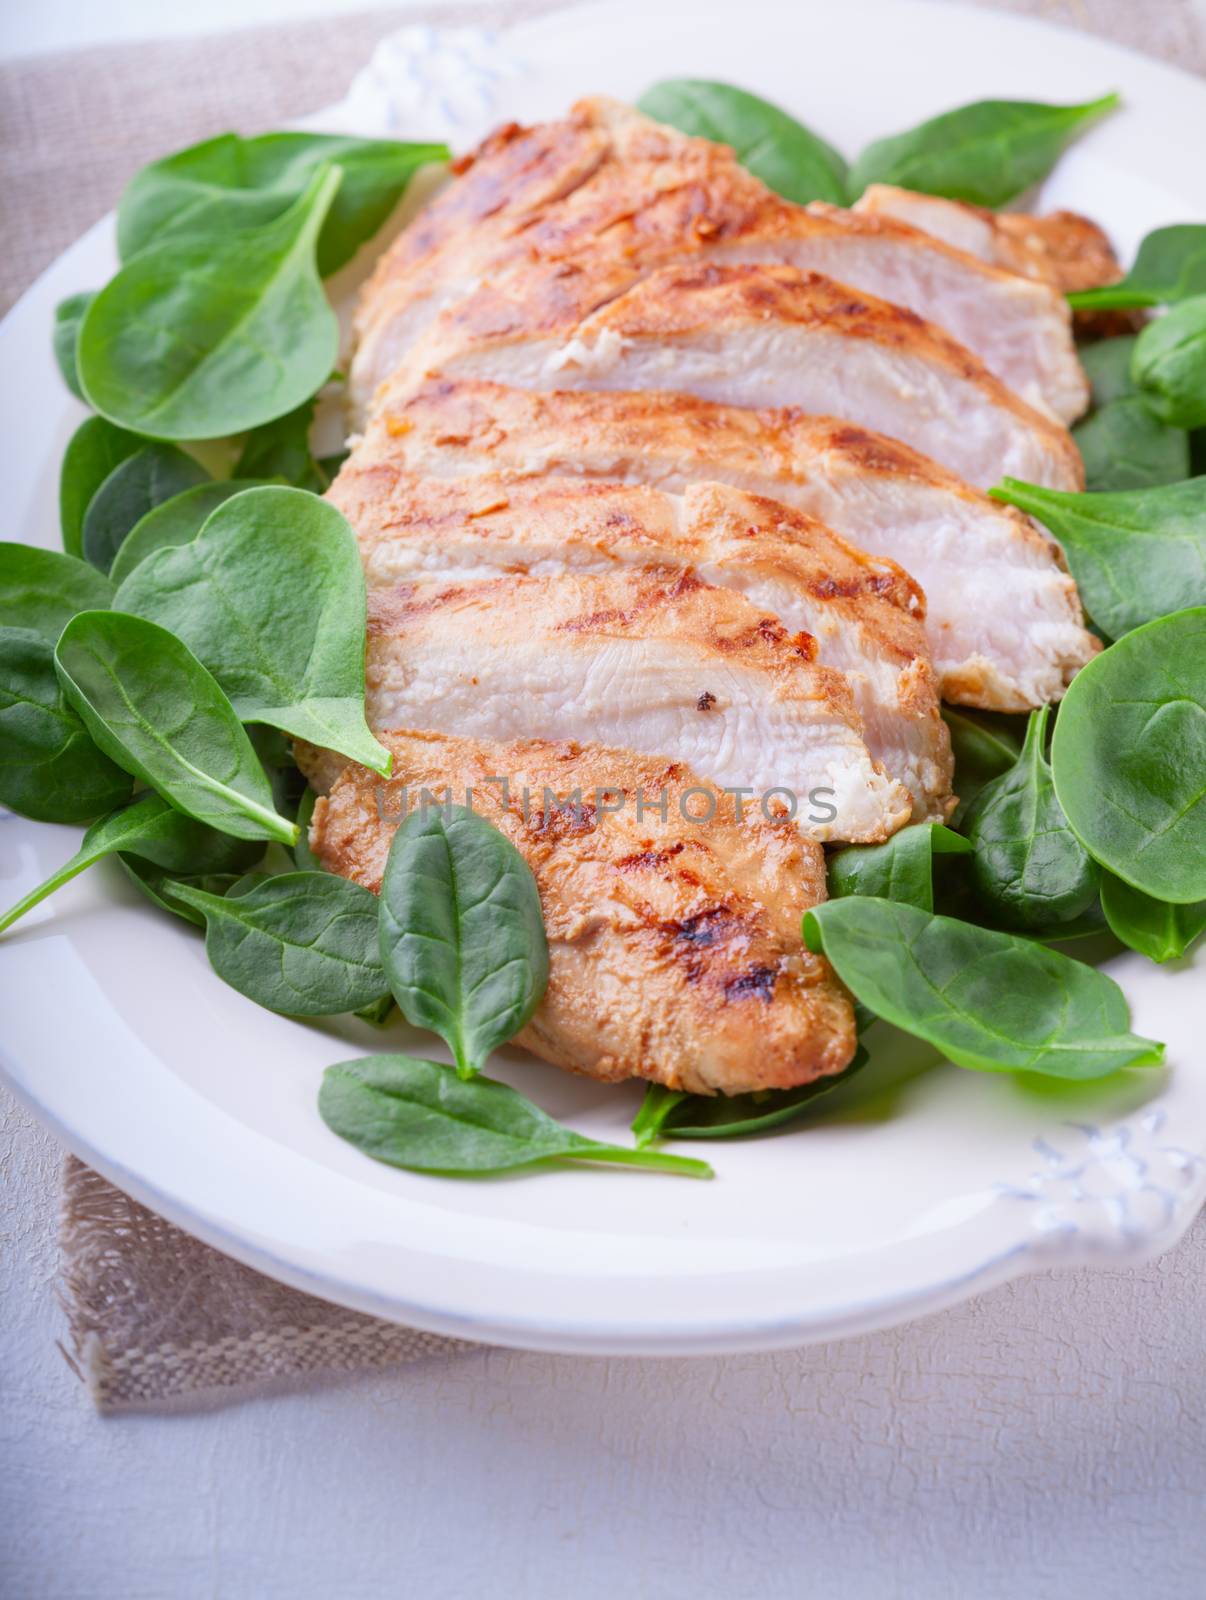 Grilled chicken breast  by supercat67